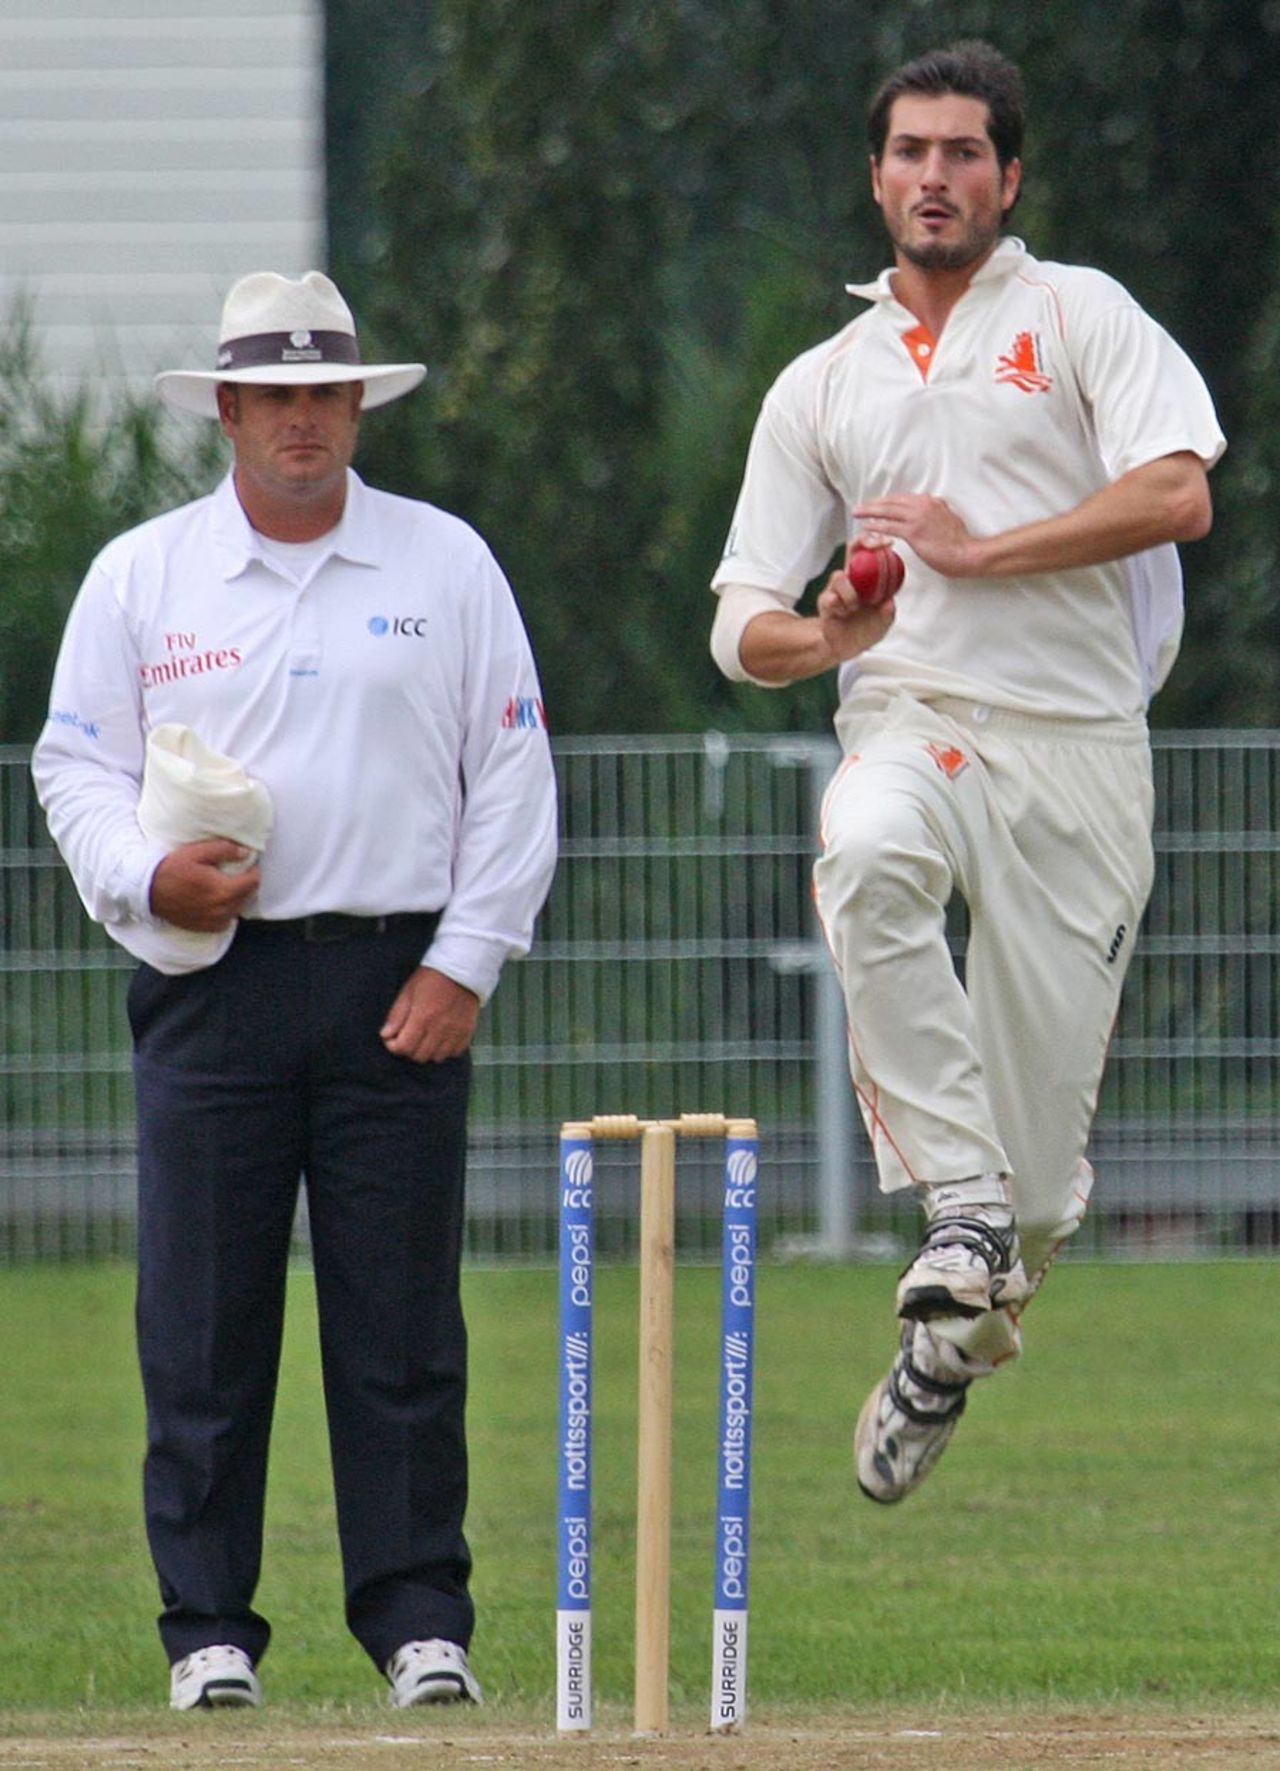 Netherlands' Berend Westdijk took three wickets in the first session, Netherlands v Zimbabwe XI, Intercontinental Cup, 1st day, Amstelveen, July 25, 2010